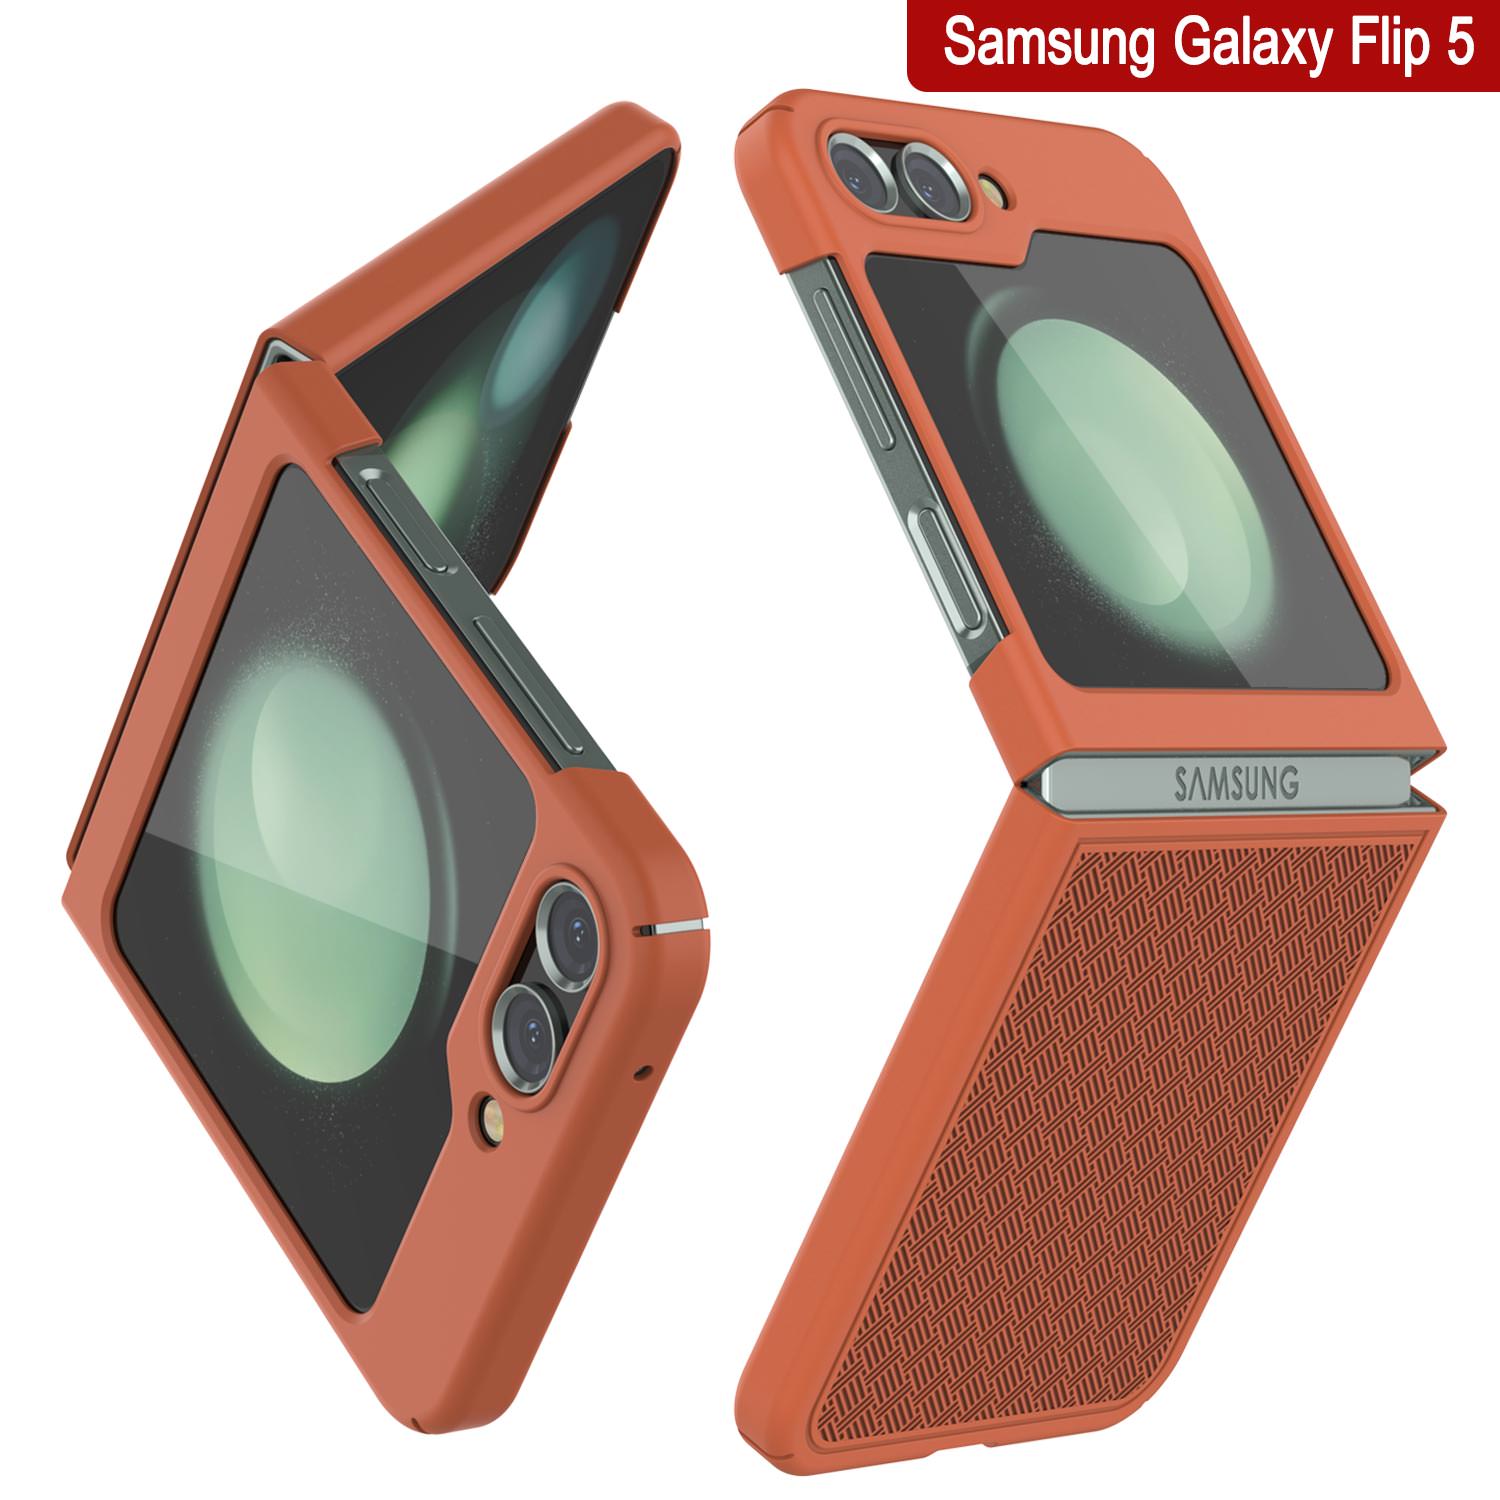 Galaxy Z Flip5 Case With Tempered Glass Screen Protector, Holster Belt Clip & Built-In Kickstand [Orange]